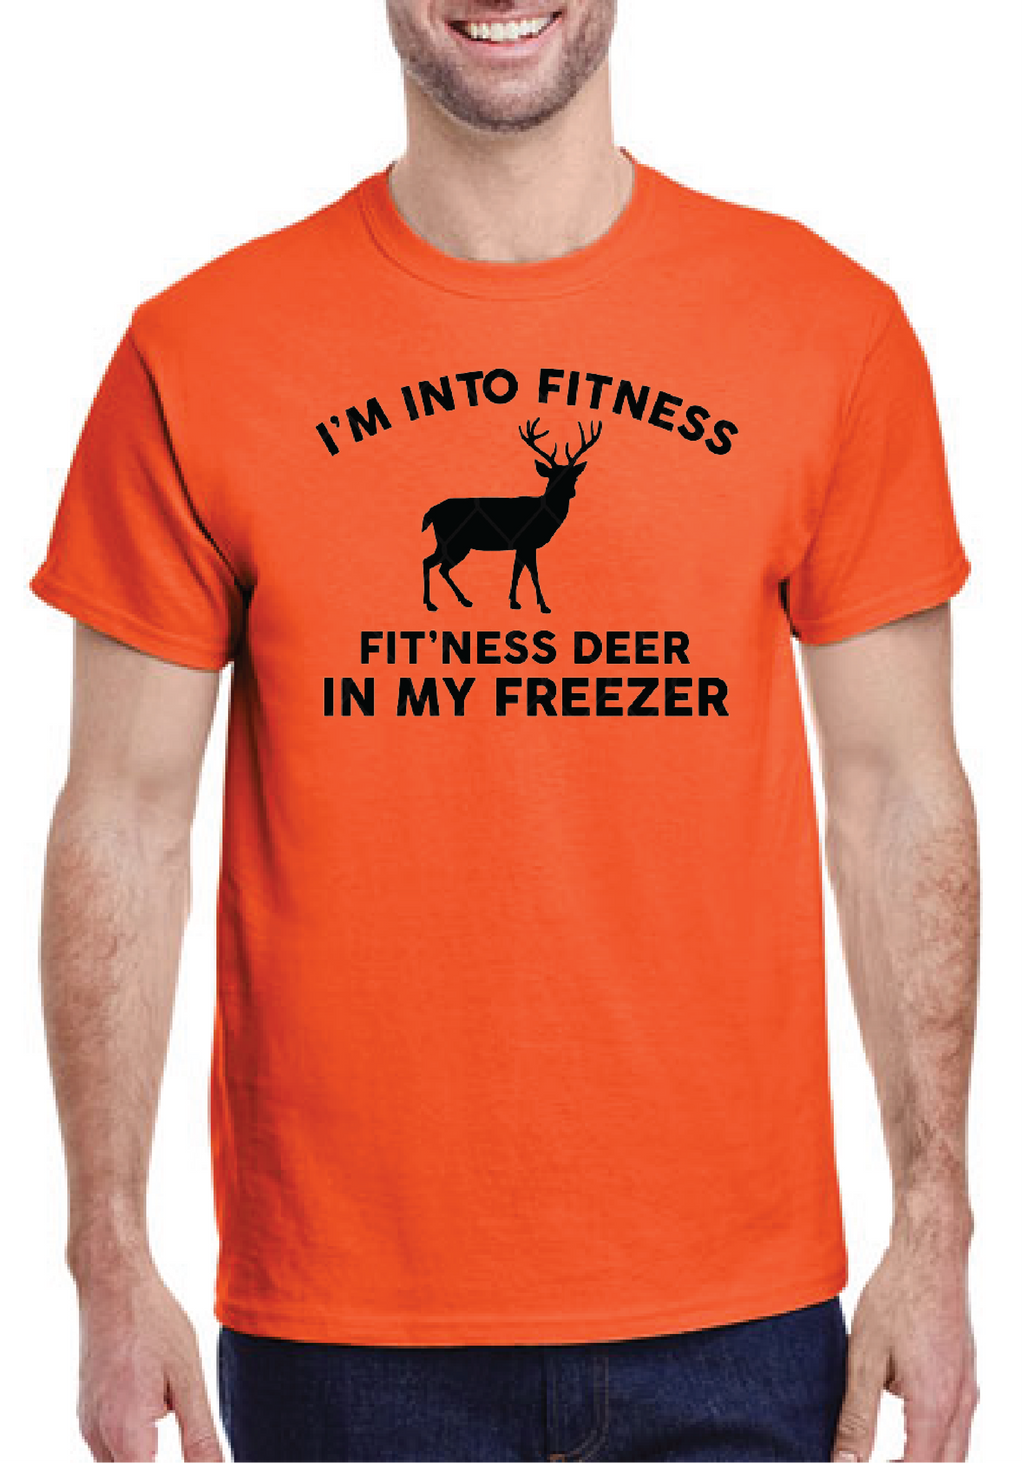 *I'm Into Fitness...Fit'ness Deer in My Freezer*